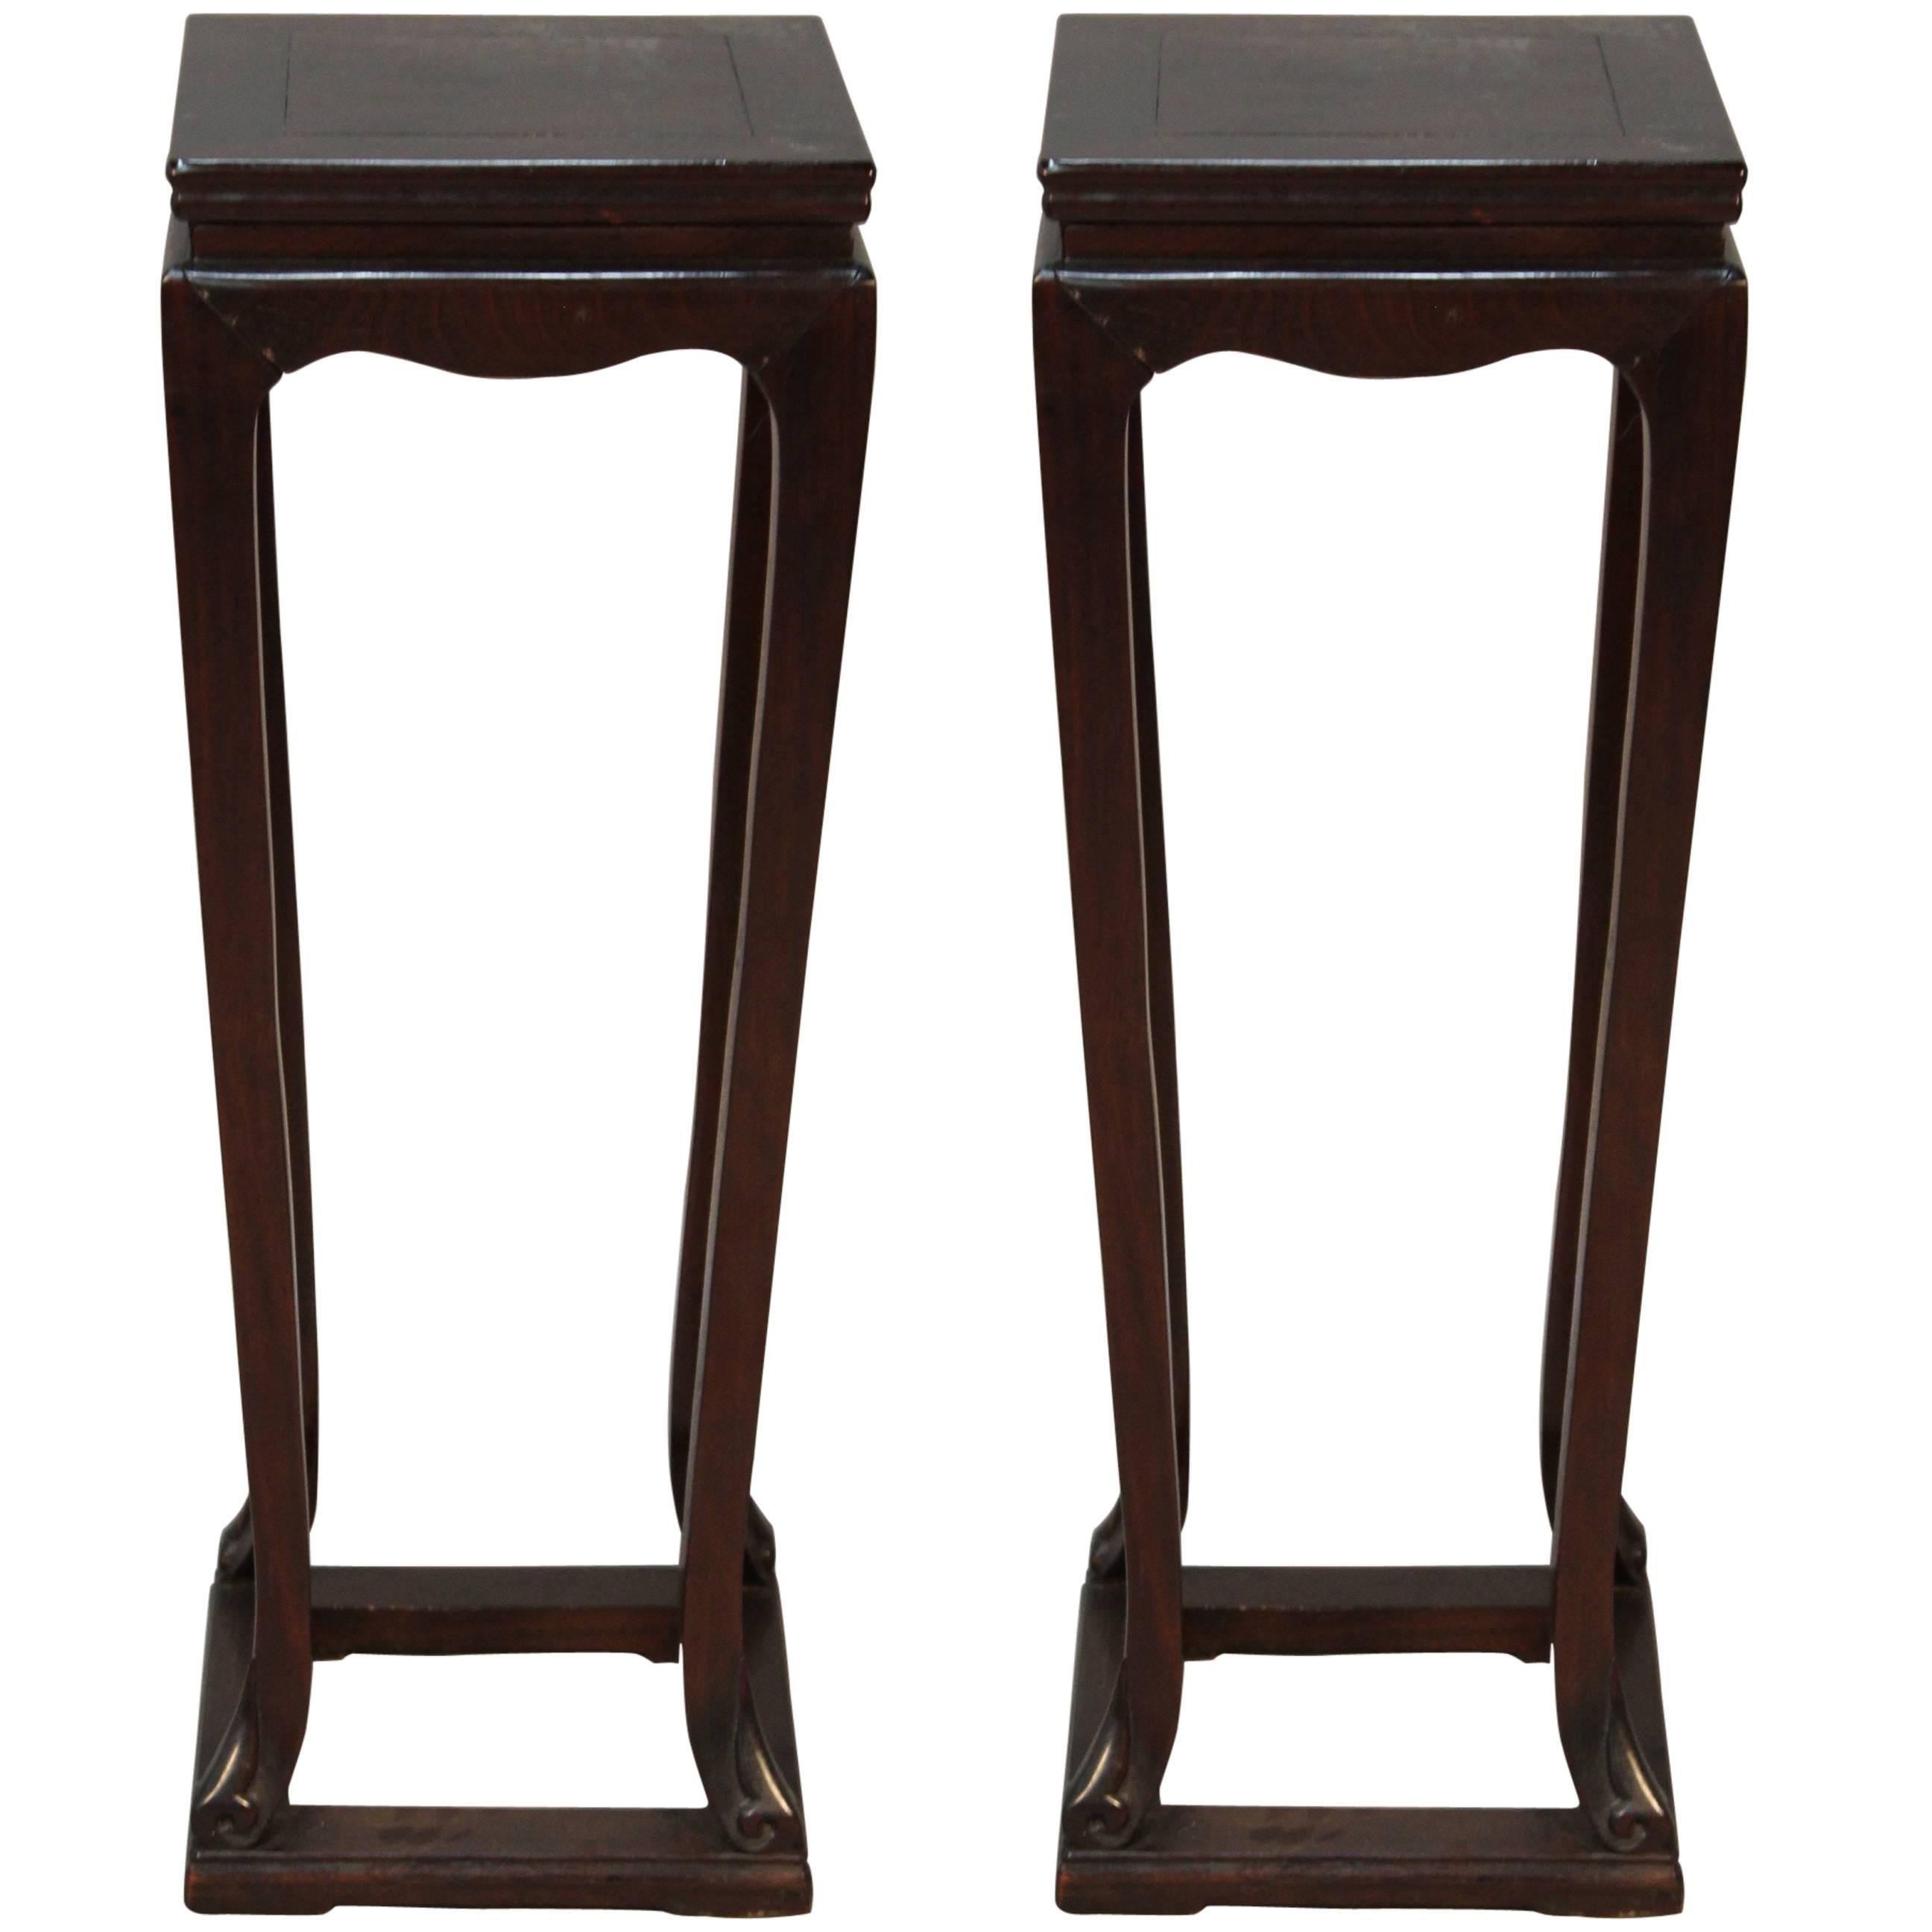 Pair of all Chinese Hardwood Pedestals with Drawers